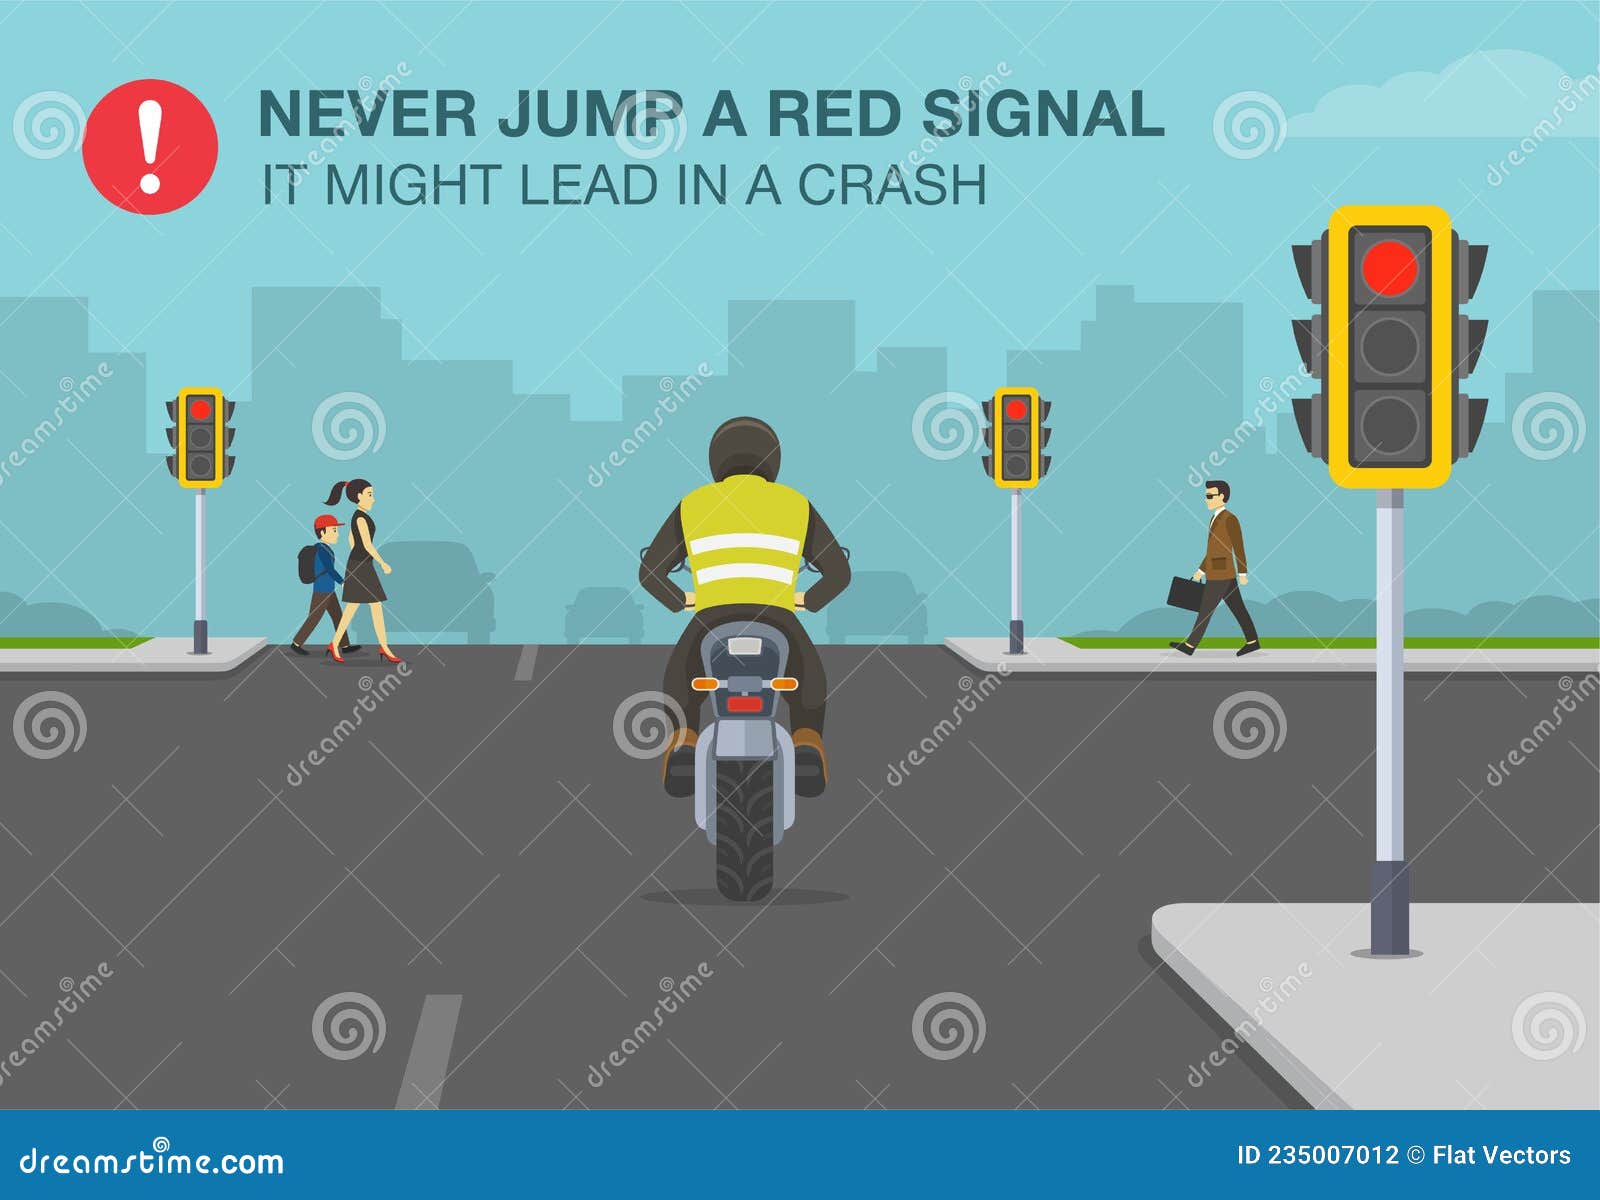 safety motorcycle driving rule. never jump a red signal, it might lead in a crash warning poster .